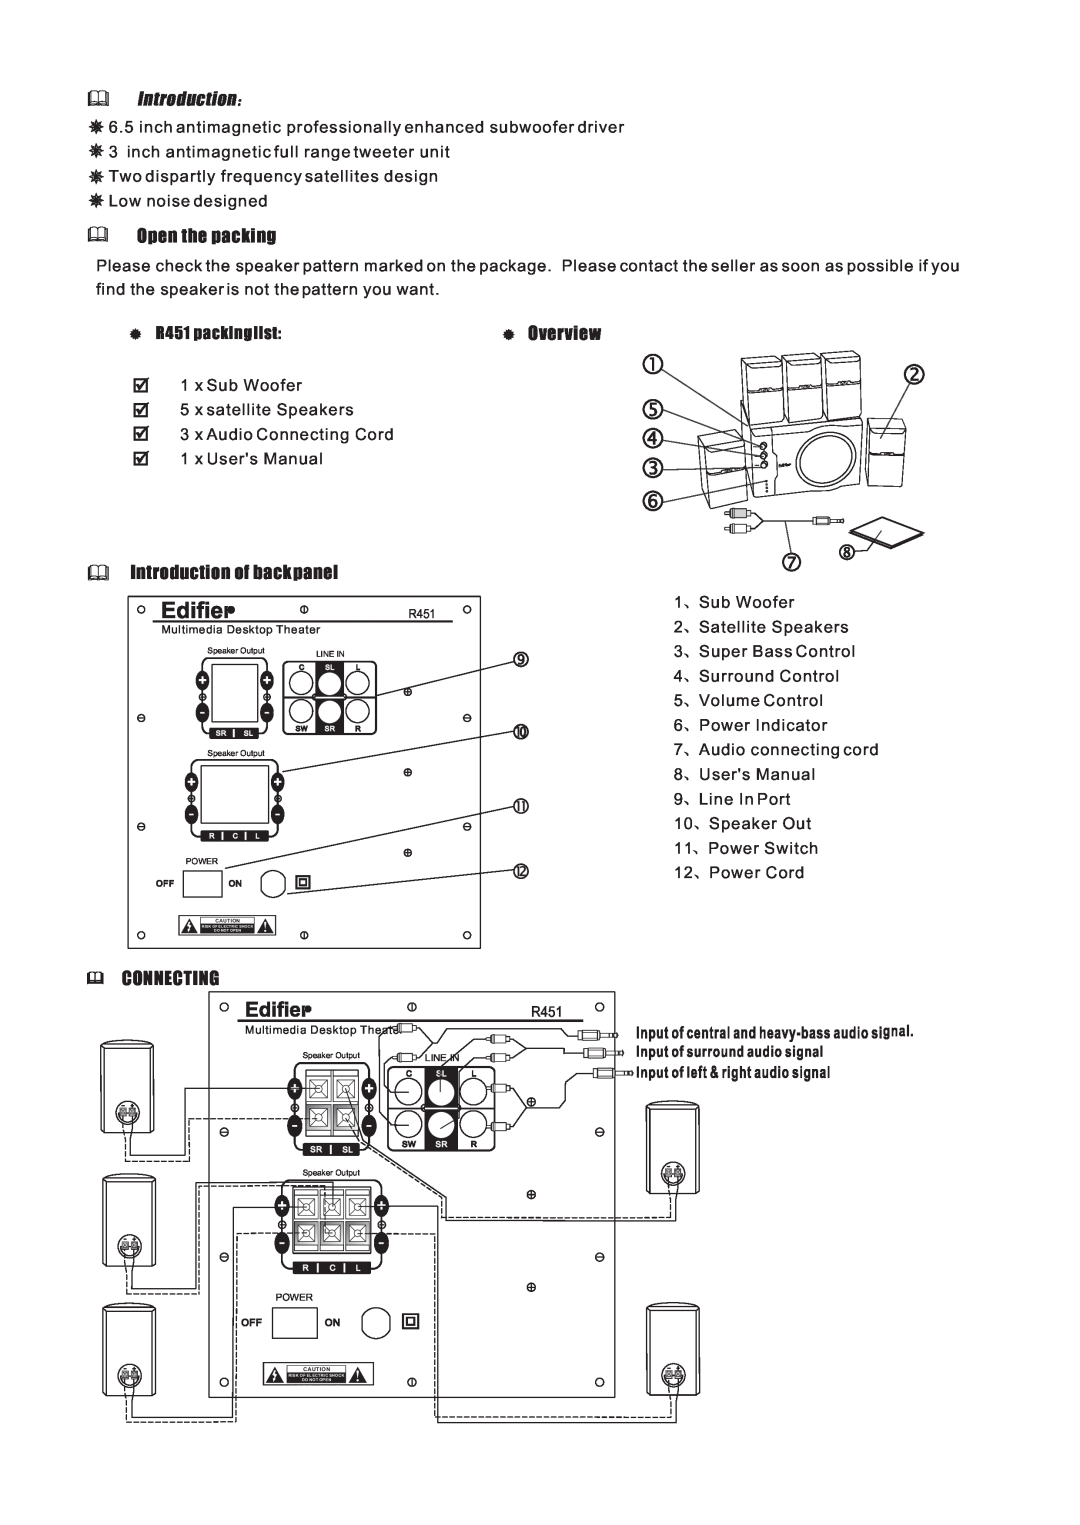 Edifier Enterprises Canada R451 user manual Open the packing, Overview, Introduction of back panel, Connecting 